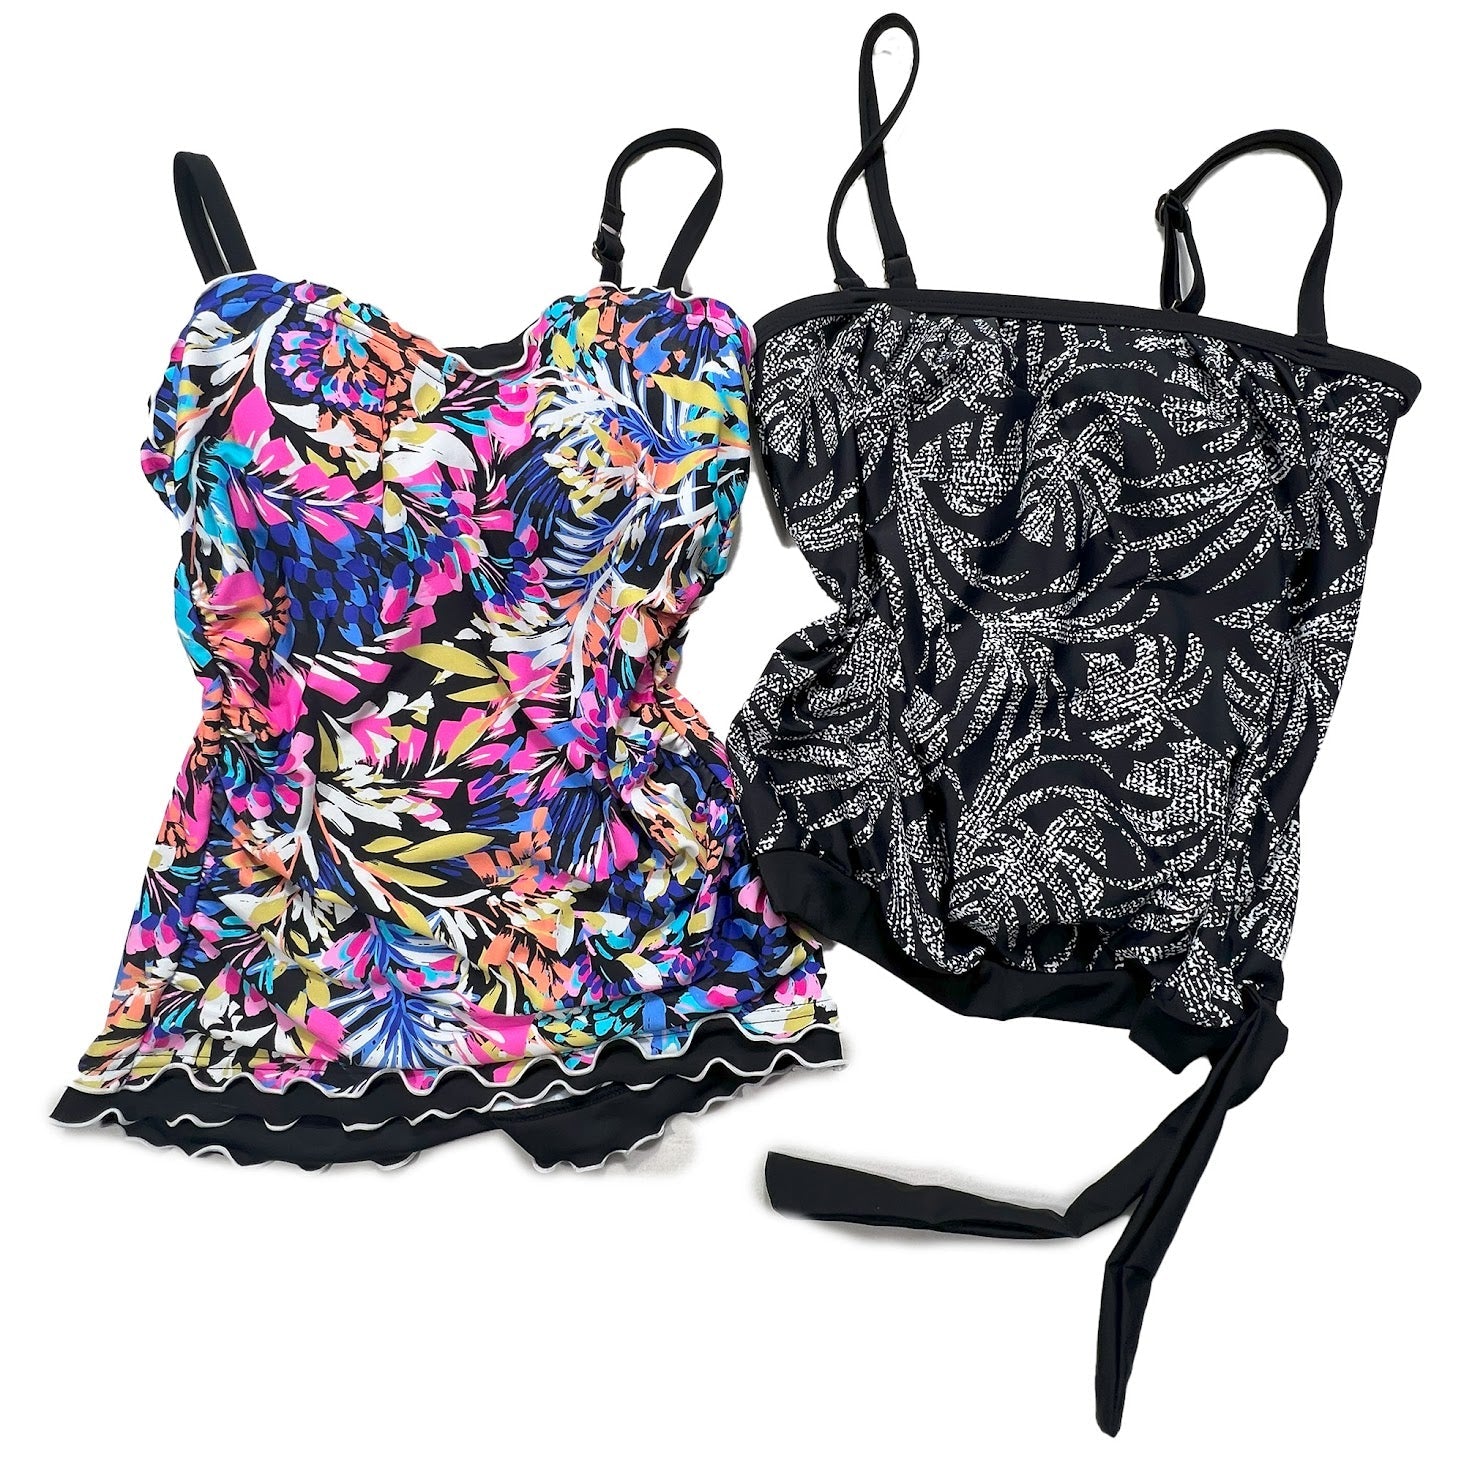 Macy's Swimwear Women's New Wholesale - Boutique by the Box Wholesale for Resellers